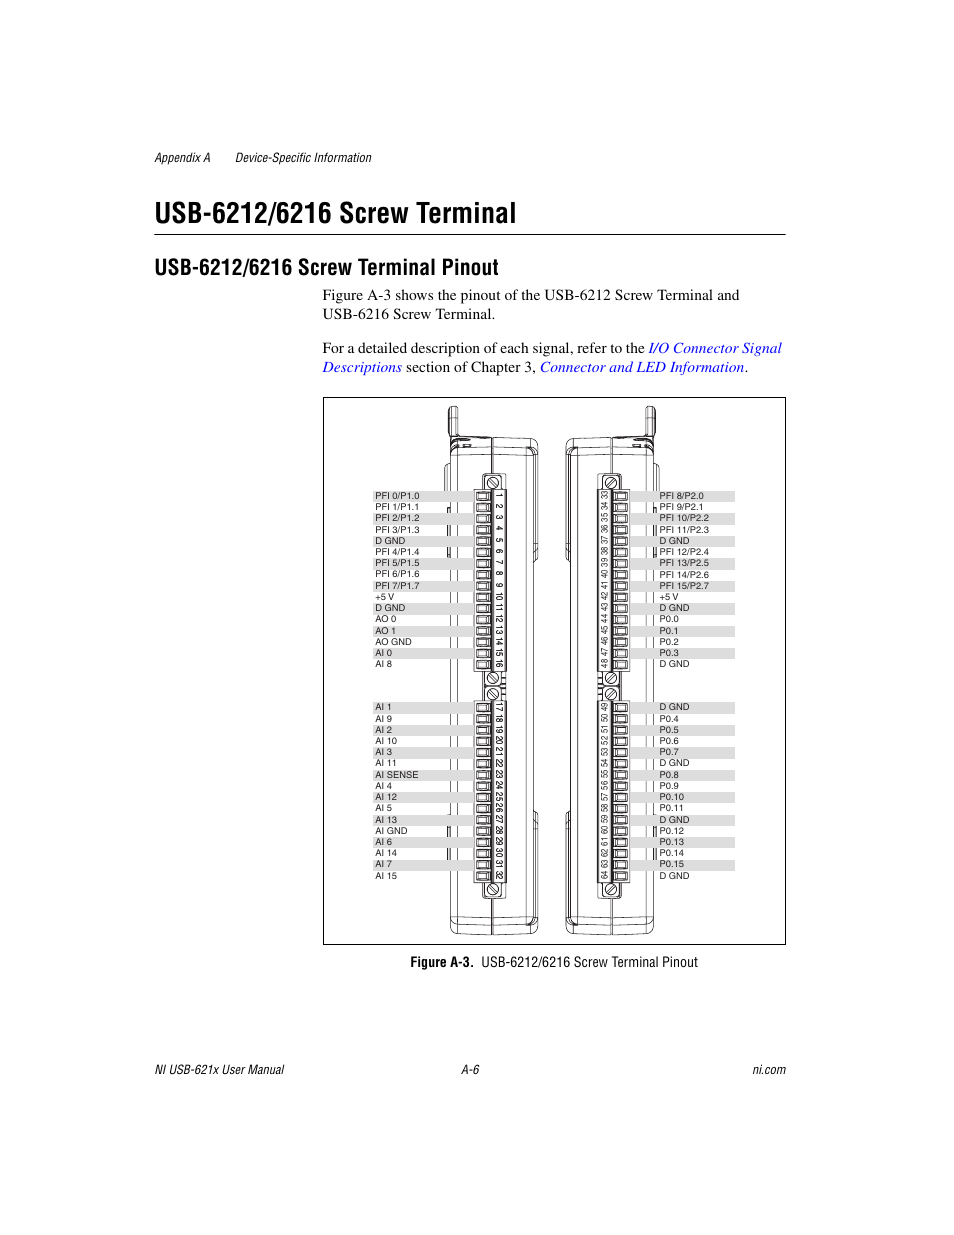 Usb-6212/6216 screw terminal, Figure a-3. usb-6212/6216 screw terminal  pinout, Figure a-3 | National Instruments Data Acquisition Device NI USB-621x  User Manual | Page 145 / 185